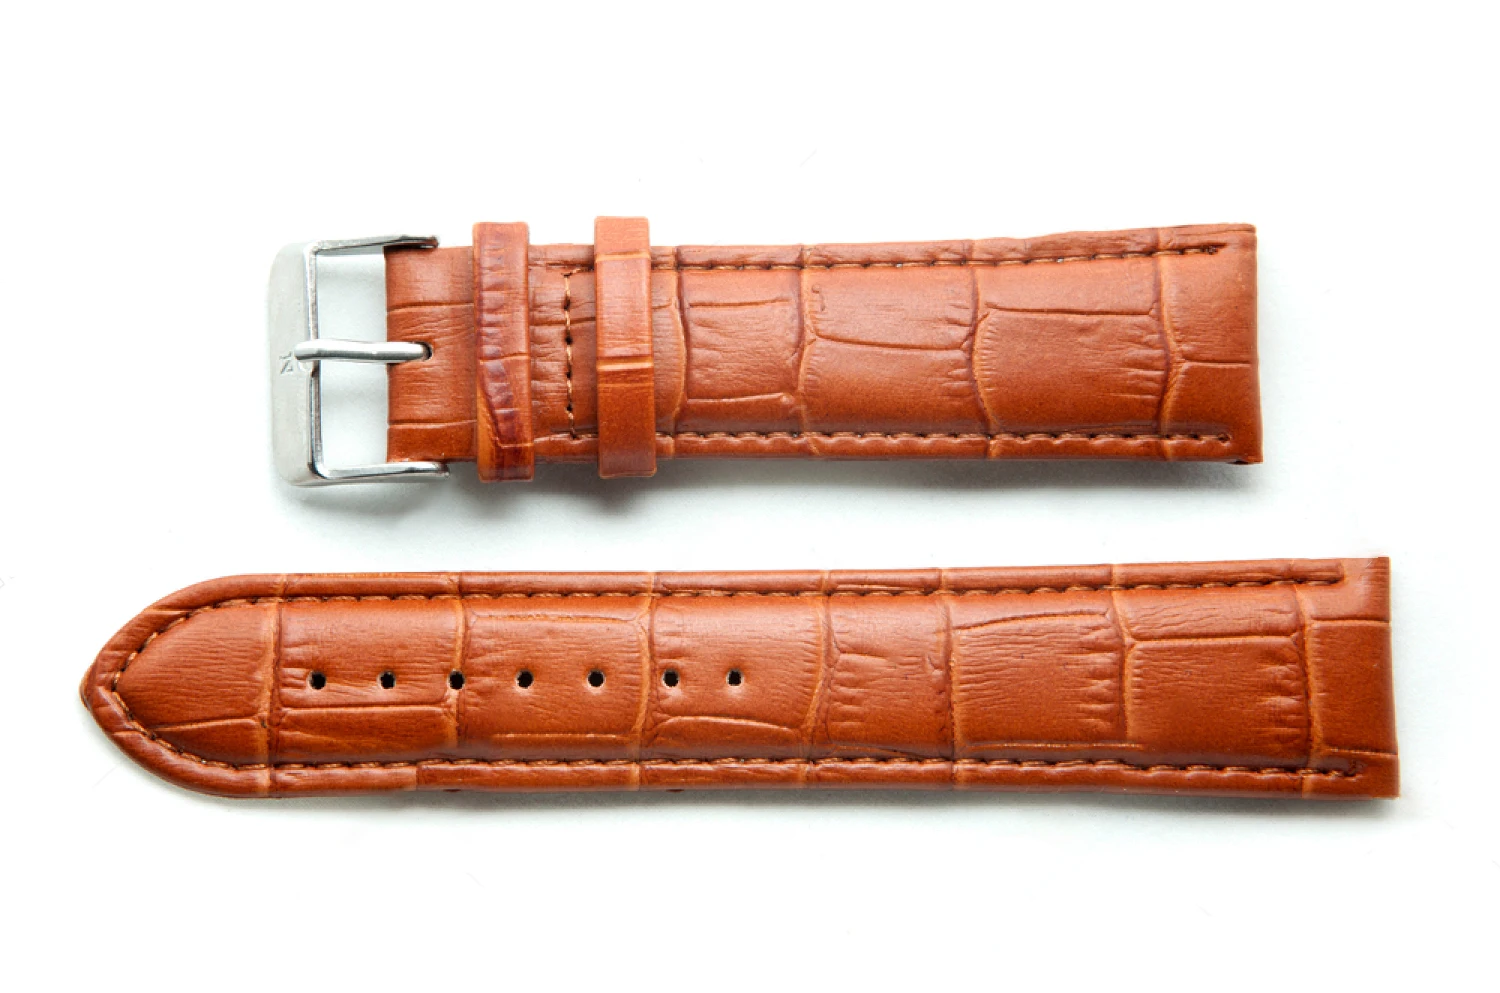 leather watch band strap compatible with all model Presage SPB303 SPB295 SPB167 SPB221 SPB217 SPB169 SPB311 SPB293 SPB203 SPB205 enlarge